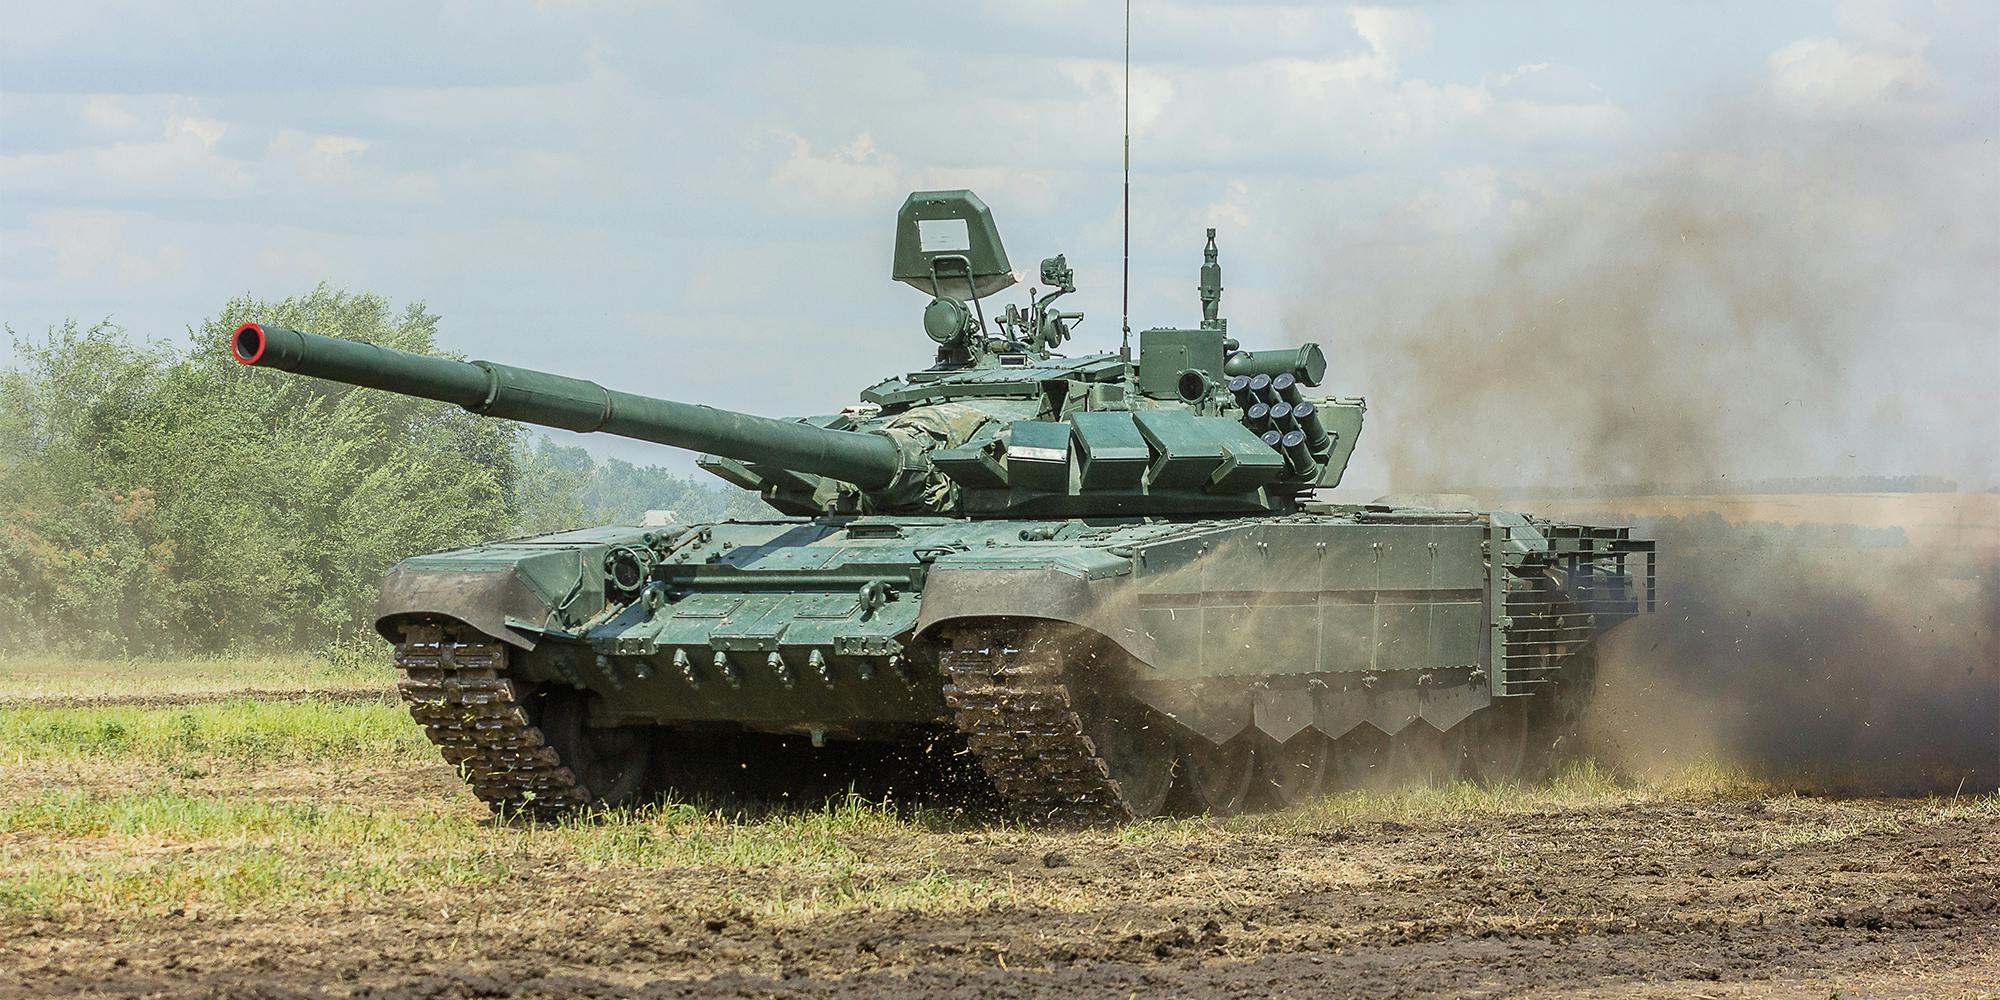 Russian Tanks Posted For Sale On Ebay To Help Ukraine